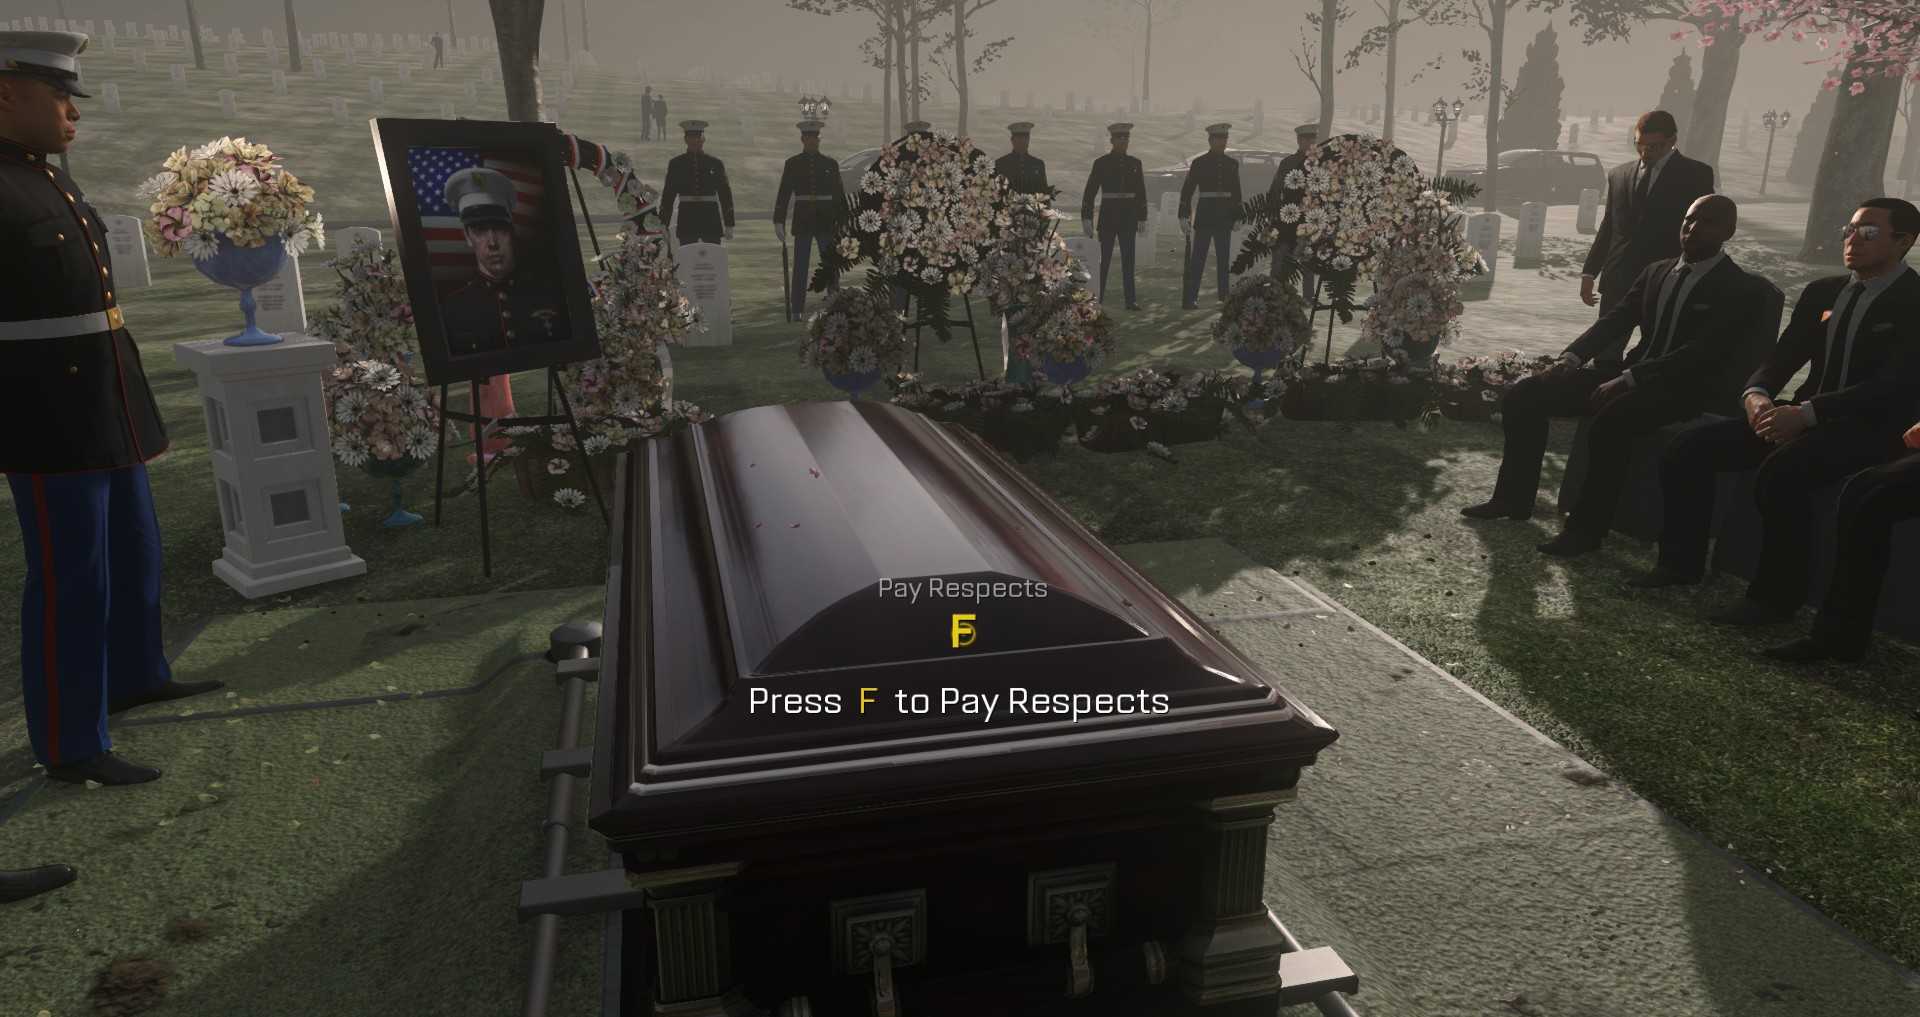 Press f to pay respects: what does “f” mean online?